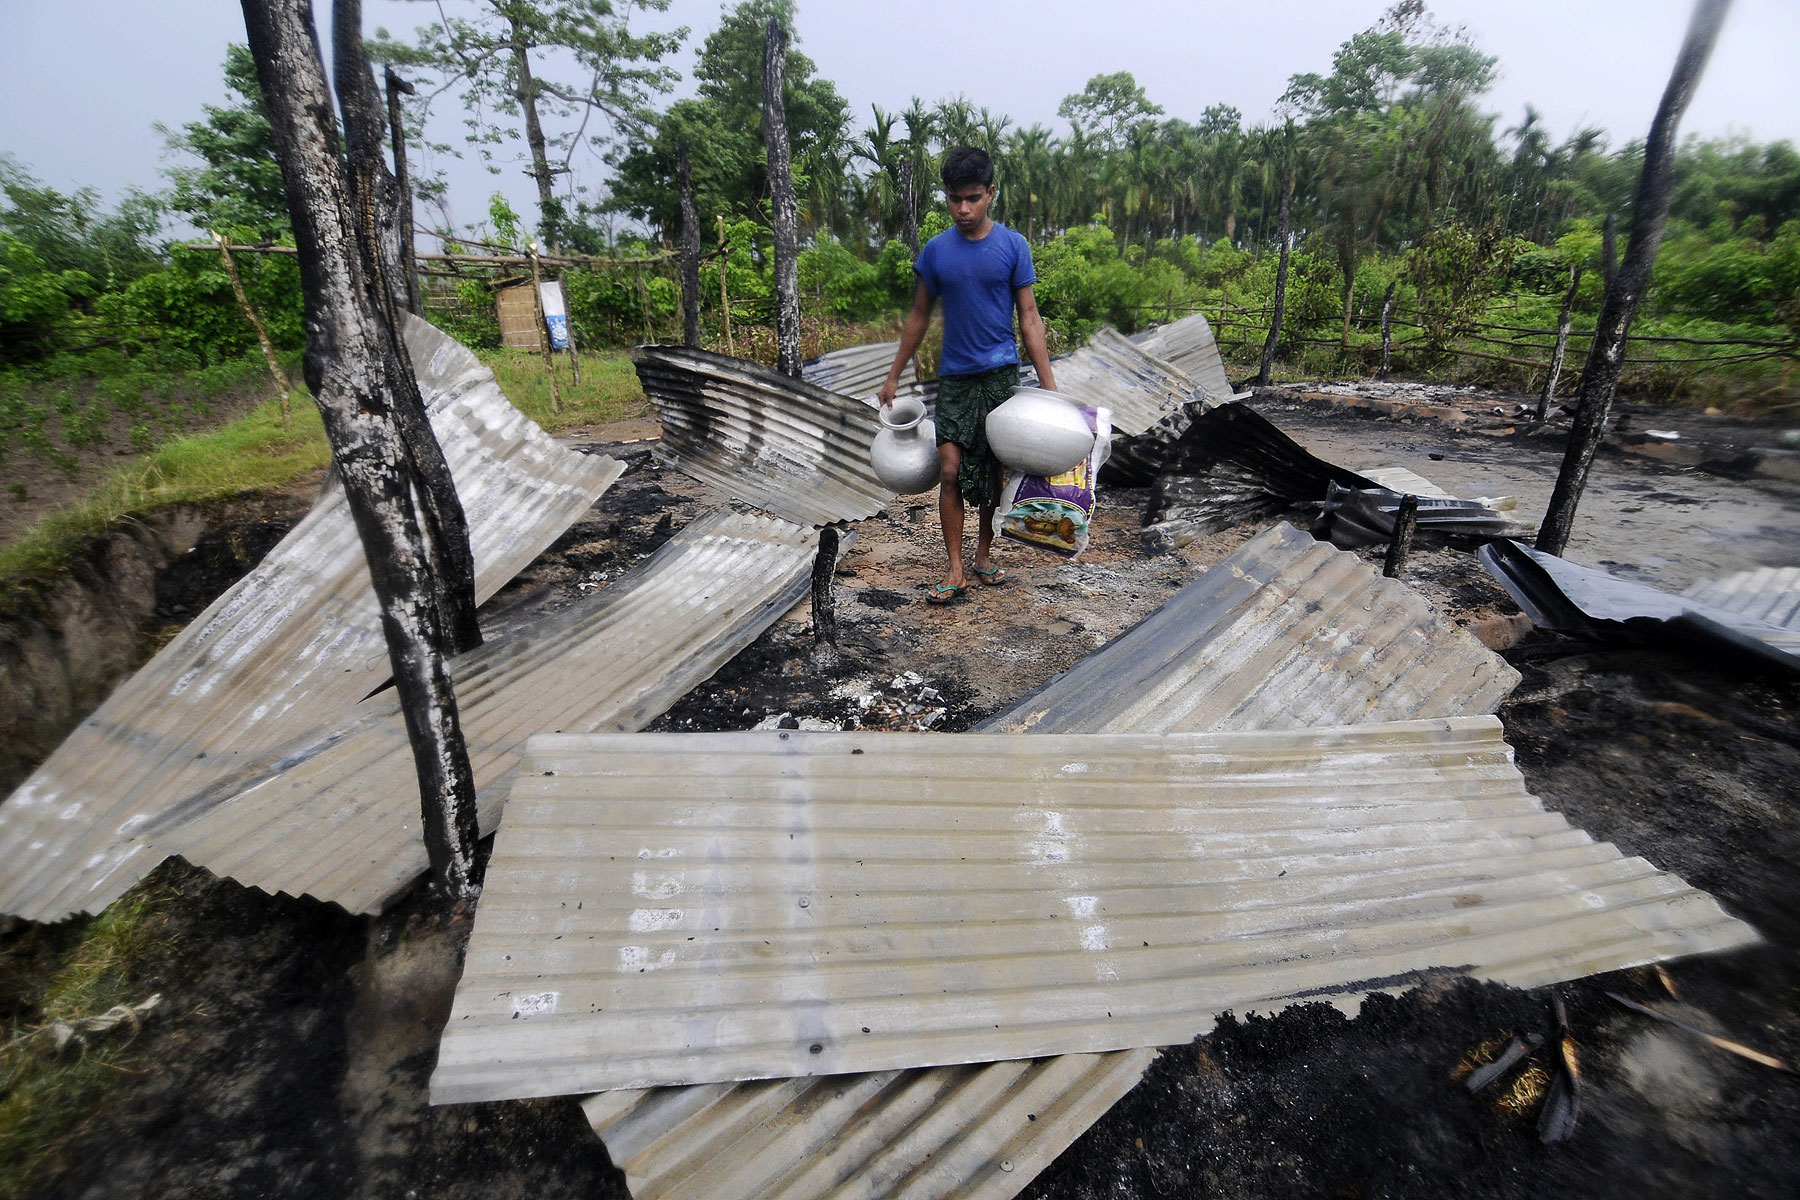 An Indian resident salvages valuables in the remains of his house in the village of Khagrabari, some 200 km west of Guwahati on May 3, 2014, after it was attacked by tribal separatists in India's remote northeastern state of Assam (Biju Boro—AFP/Getty Images)